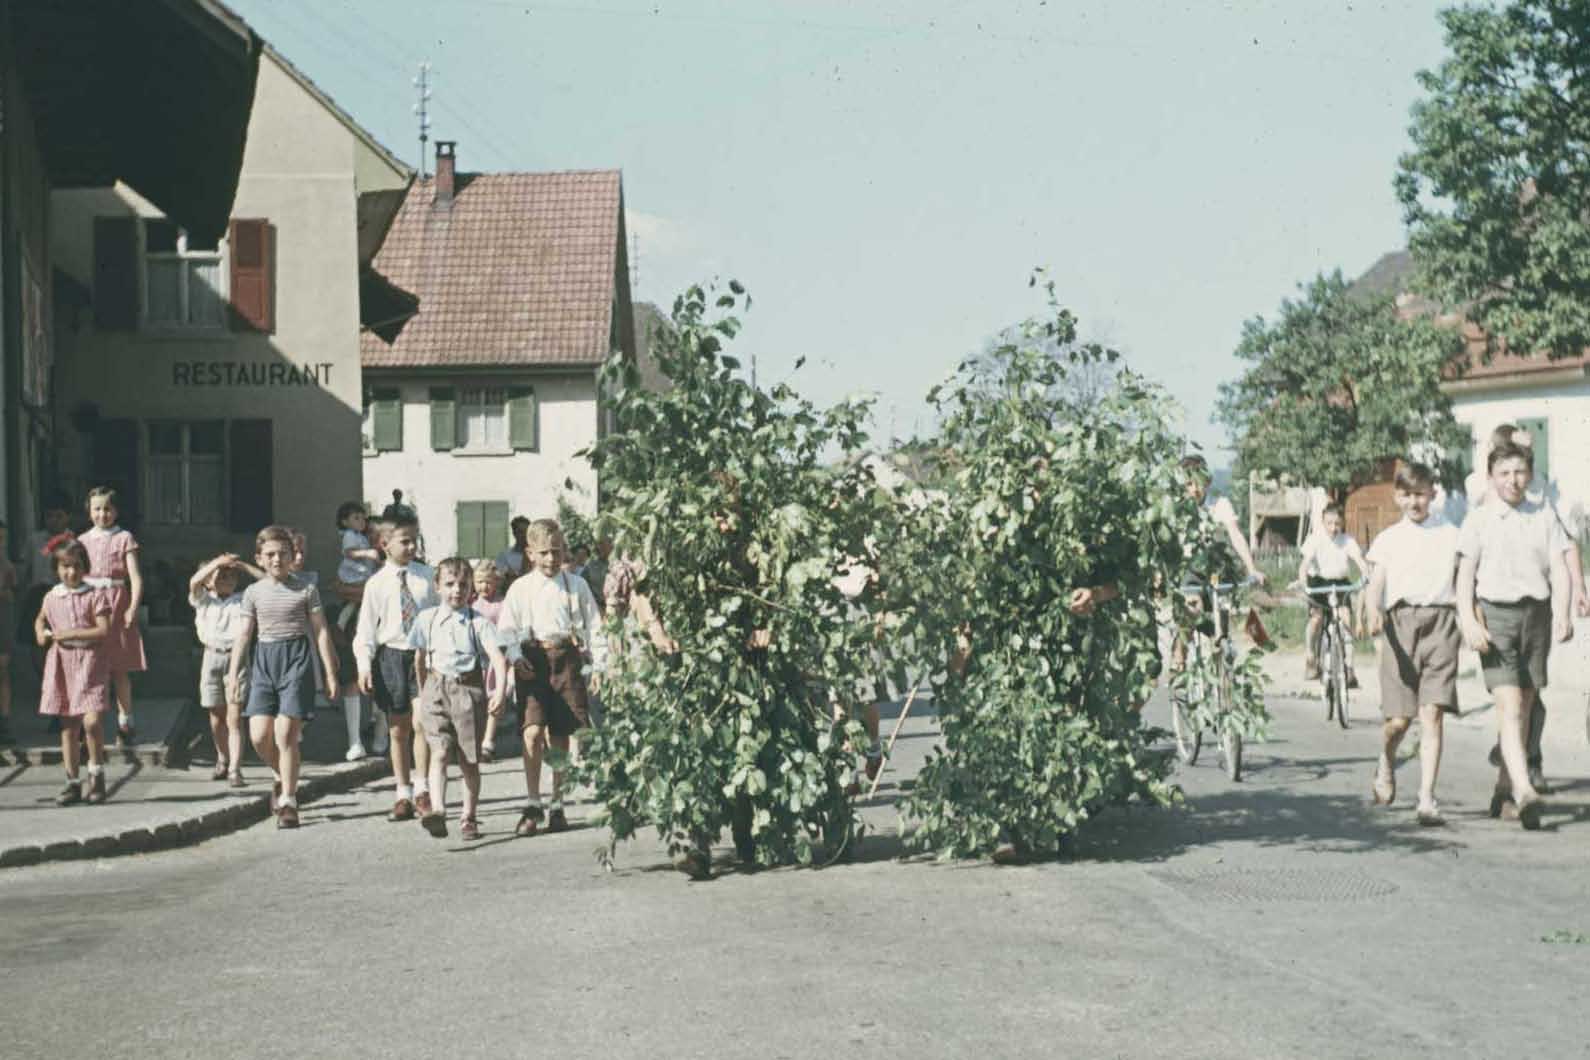 In Ettingen the Whitsun bushes enjoy splashing water at their audience, particularly its female members, as they make their way from fountain to fountain © Theodor Strübin/Museum.BL